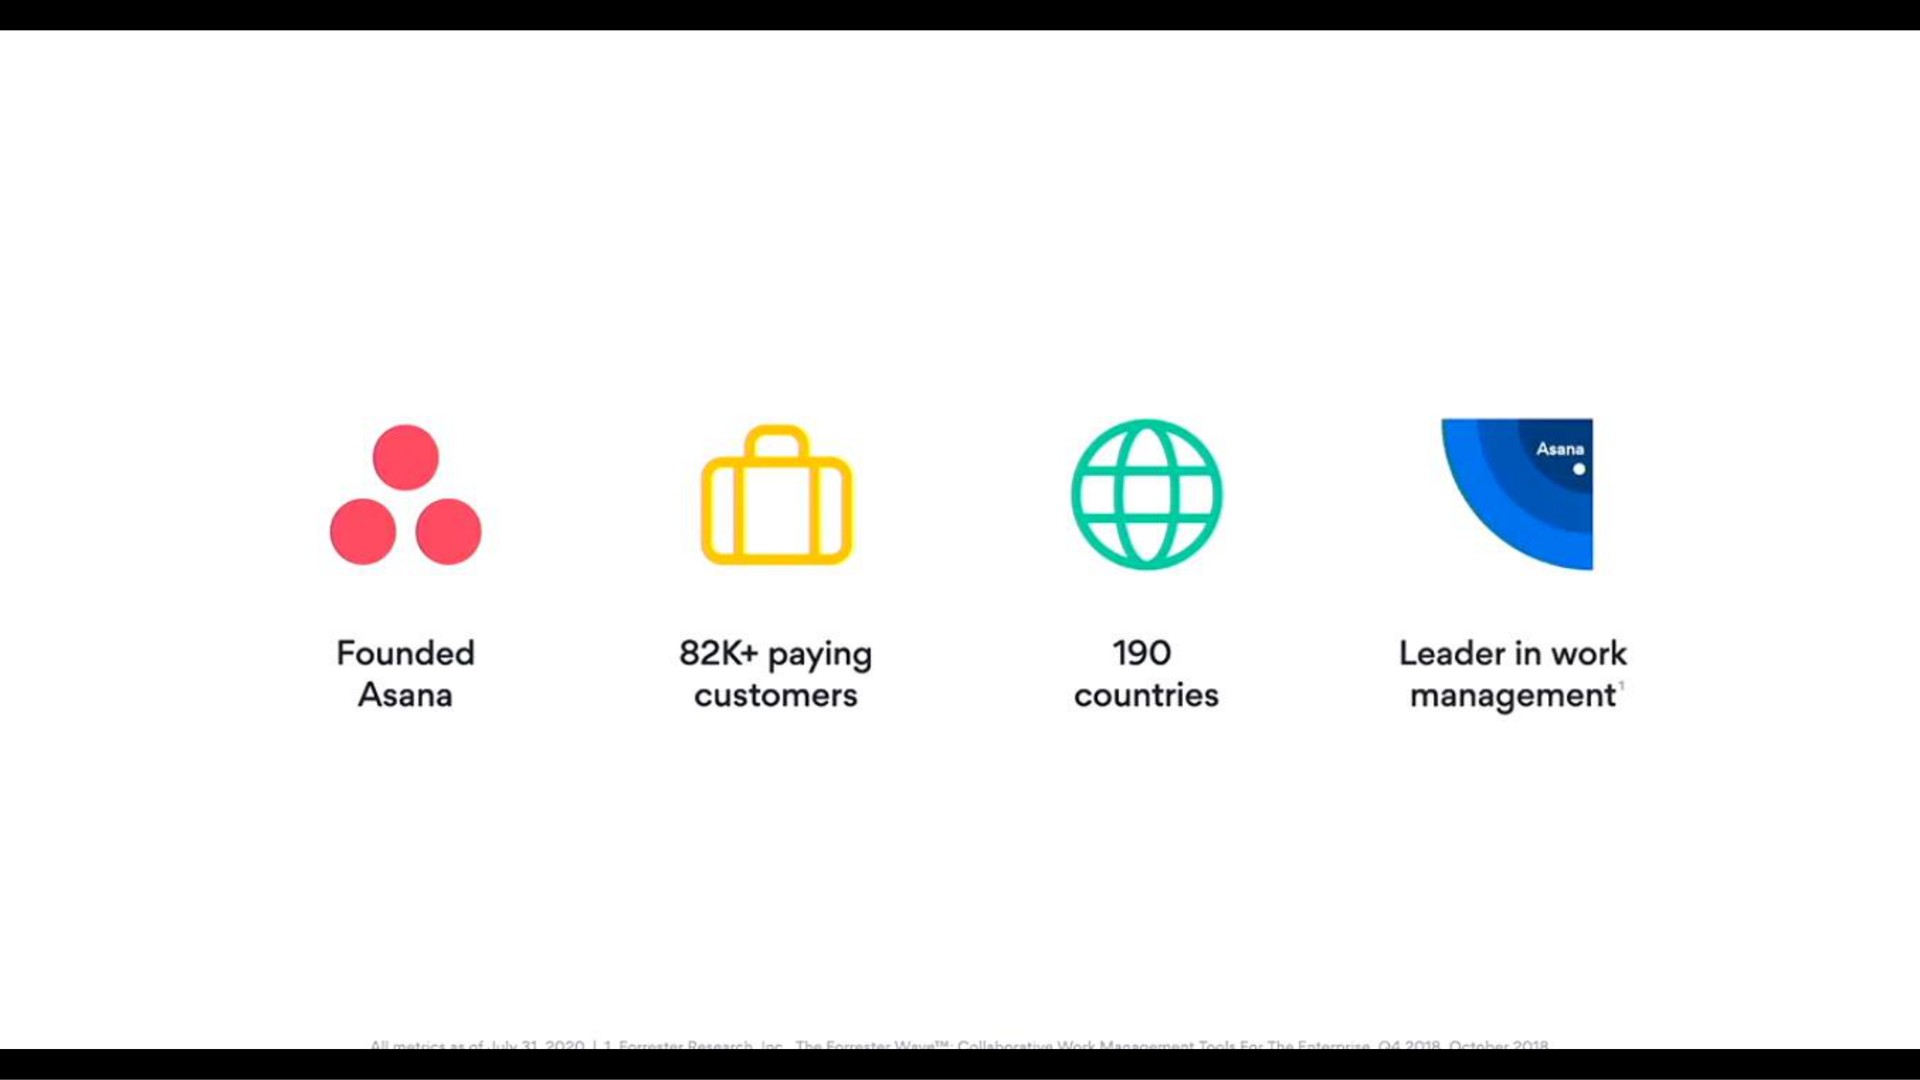 founded asana paying customers countries leader in work management | Asana